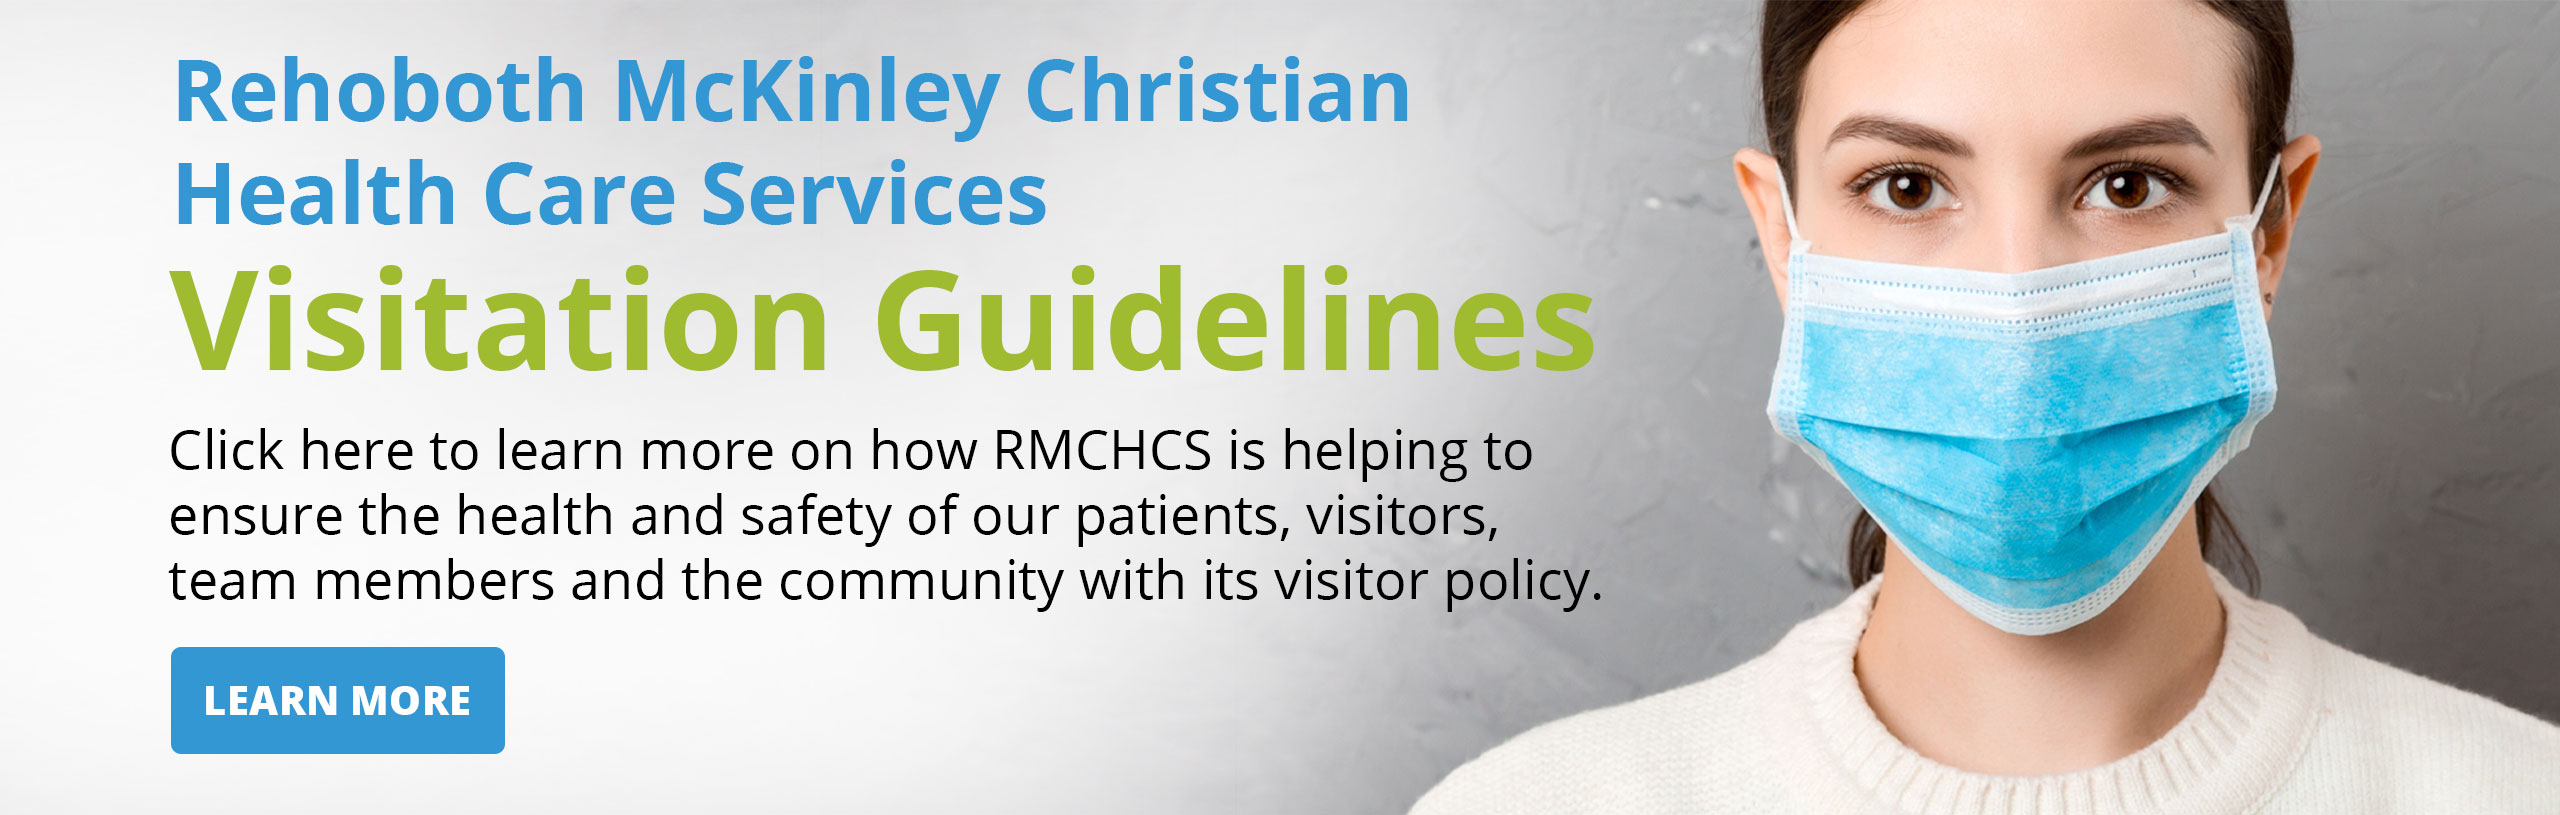 Banner picture of a female close up, wearing a mask. Banner says:

Rehoboth Mckinley Christian Health Care Services

Visitation Guidelines

Click here to learn more on how RMCHCS is helping to ensure the health and safety of our patients, visitors, team members and the community with it's visitor policy.

(((LEARN MORE)))